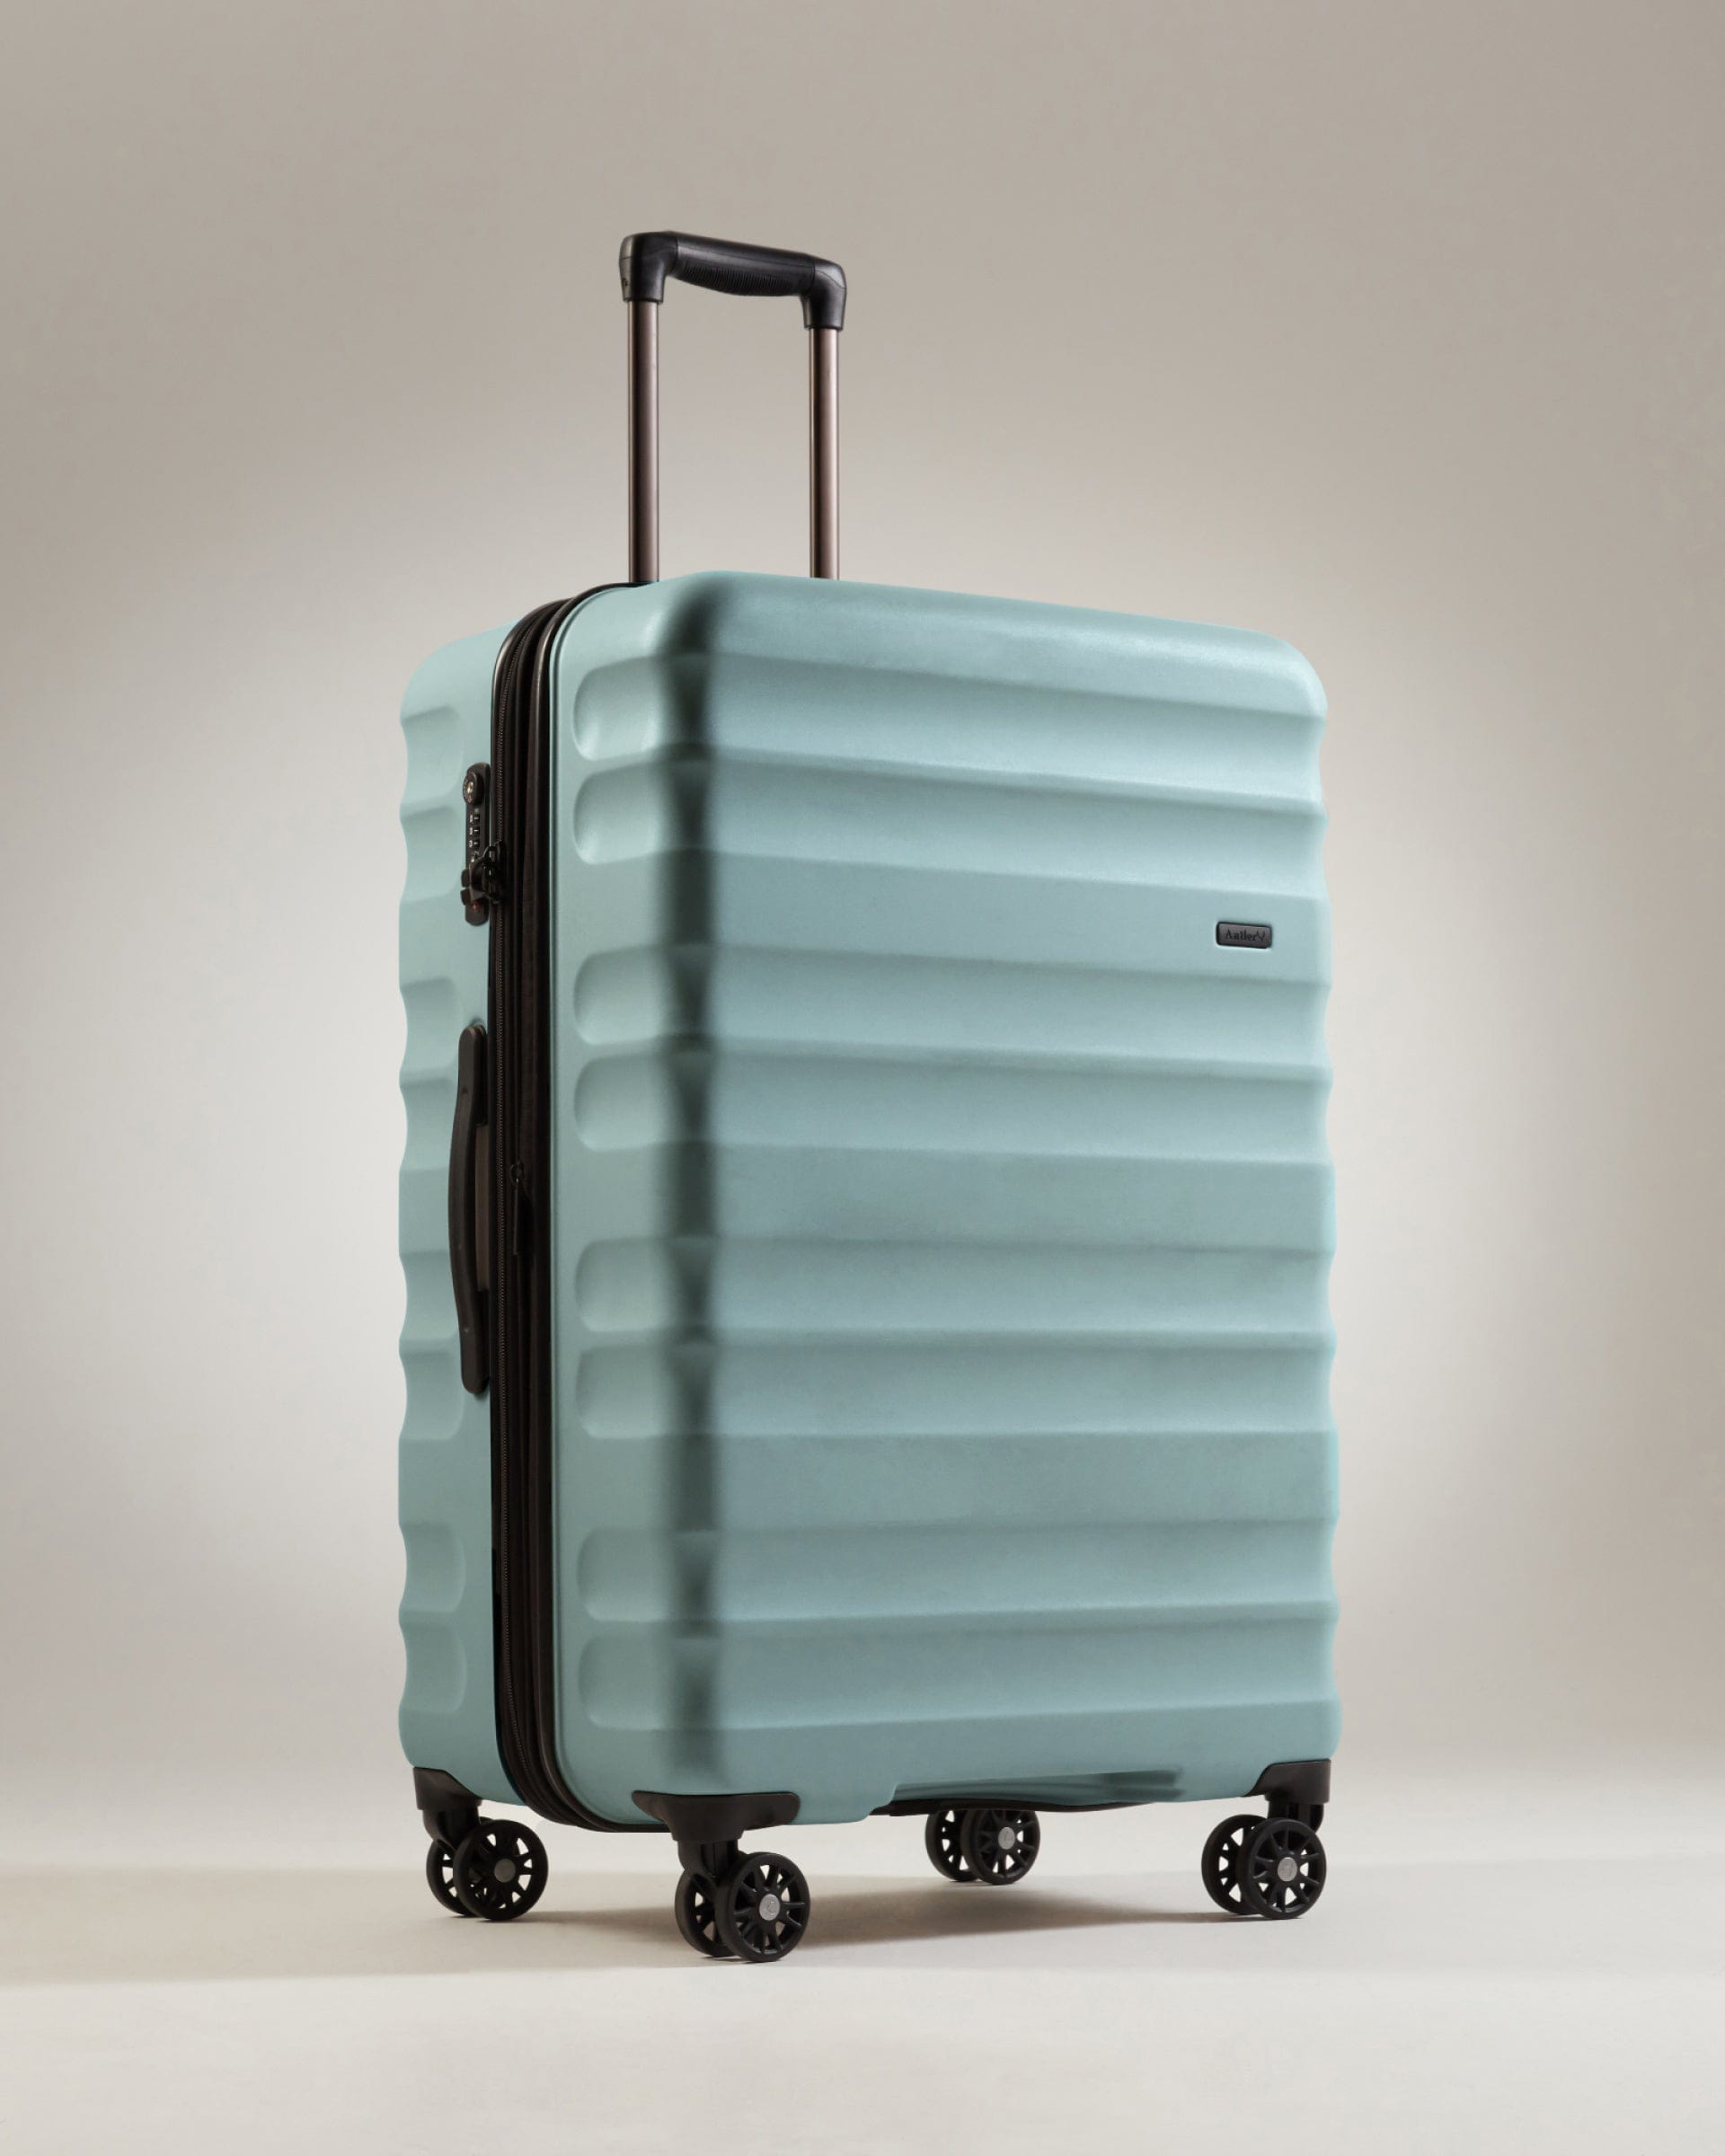 View Antler Clifton Large Suitcase In Mineral Size 80cm x 51cm x 34cm information